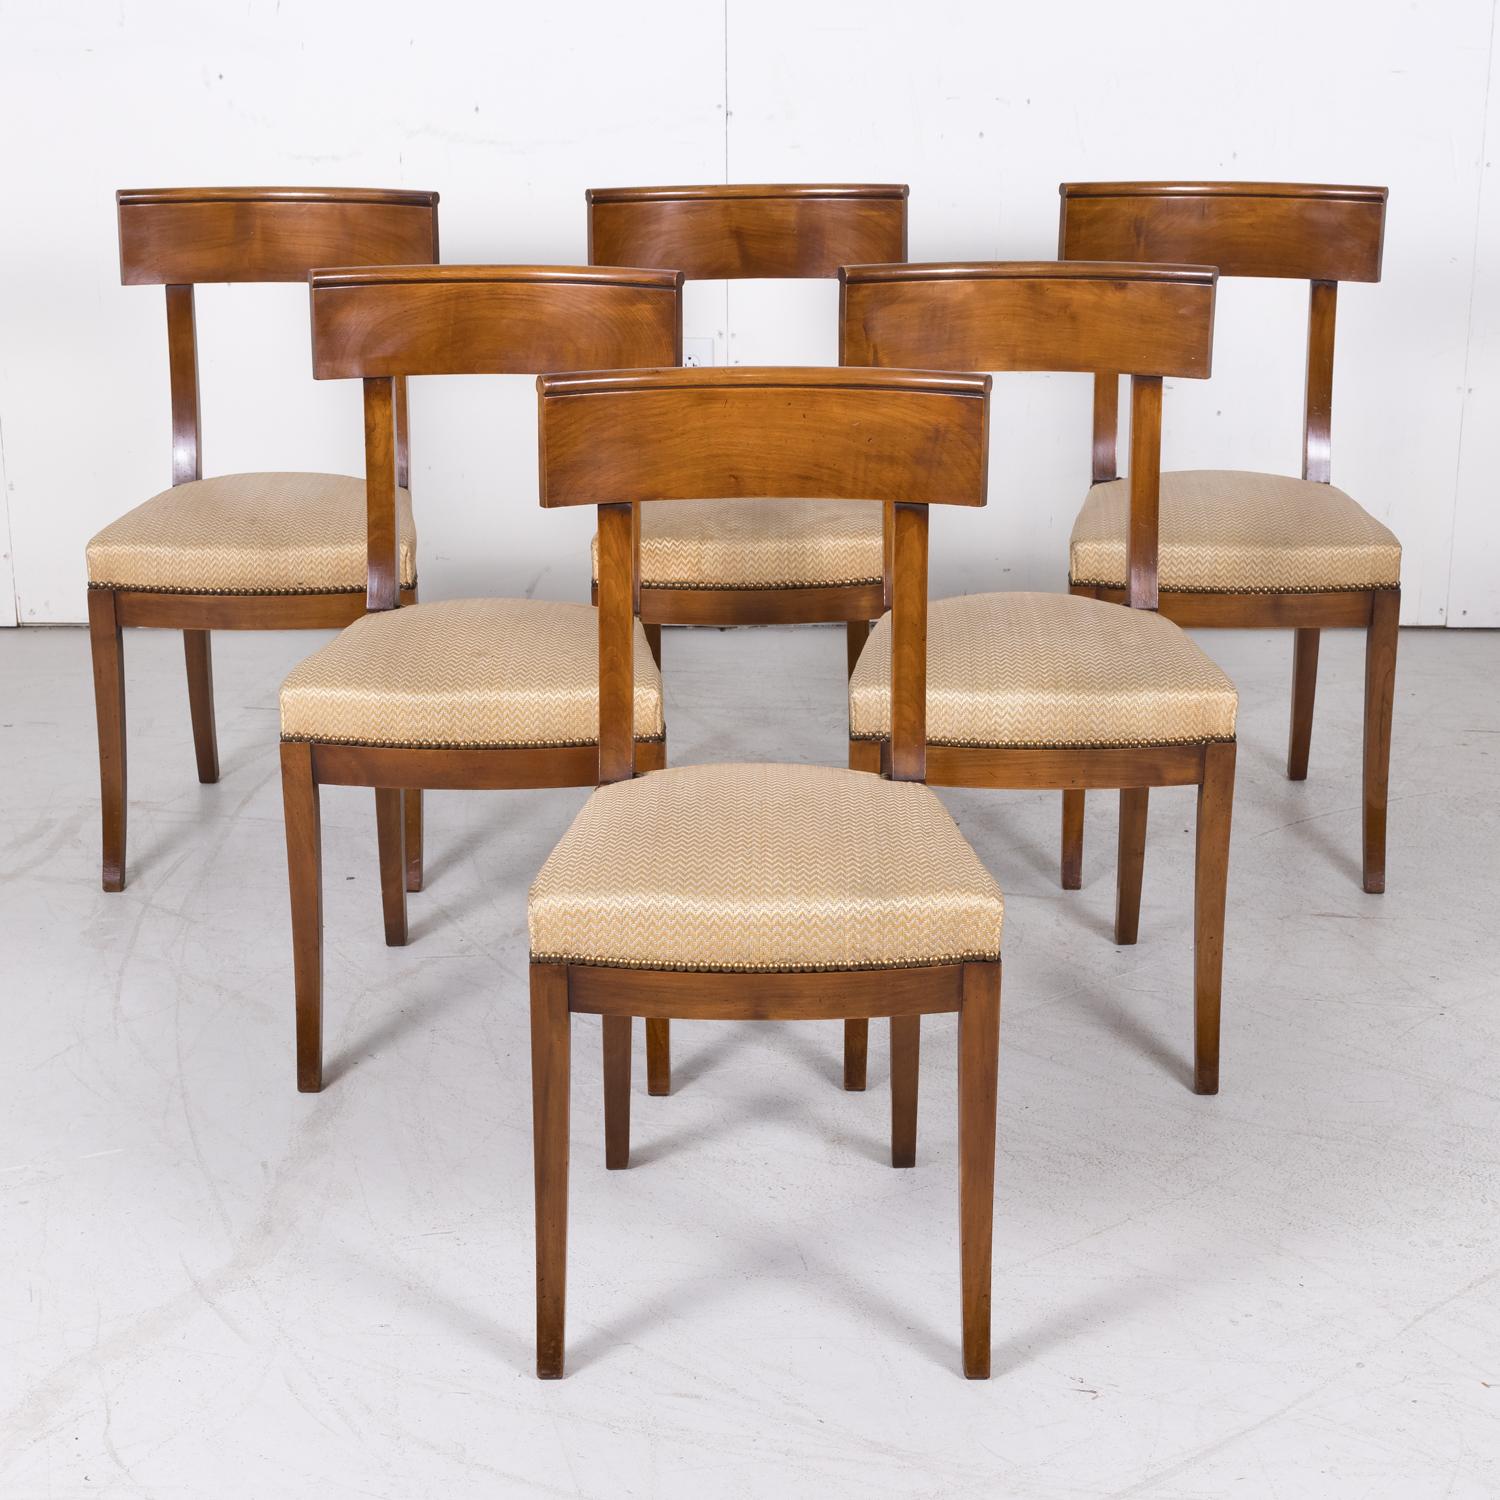 Set of six vintage French Directoire style side chairs handcrafted of walnut, circa 1970s. These Neoclassical dining chairs feature a tailored look with a curved, wraparound back rail and a generous, comfortable seat with a curved front above a